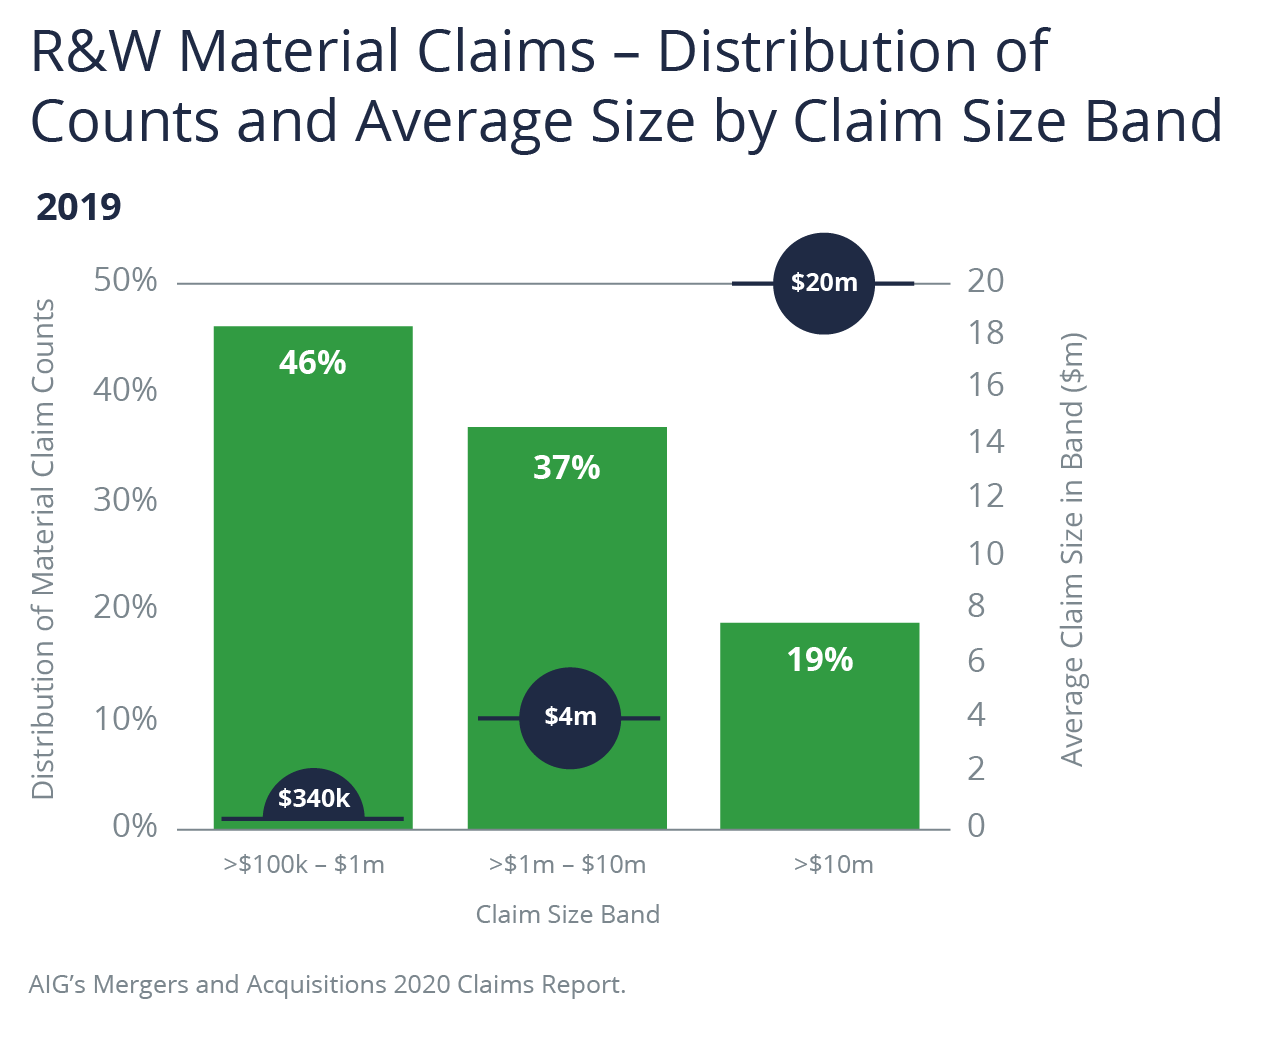 R&W Material Claims Graphic - Distribution of Counts and Average Size by Claim Size Band